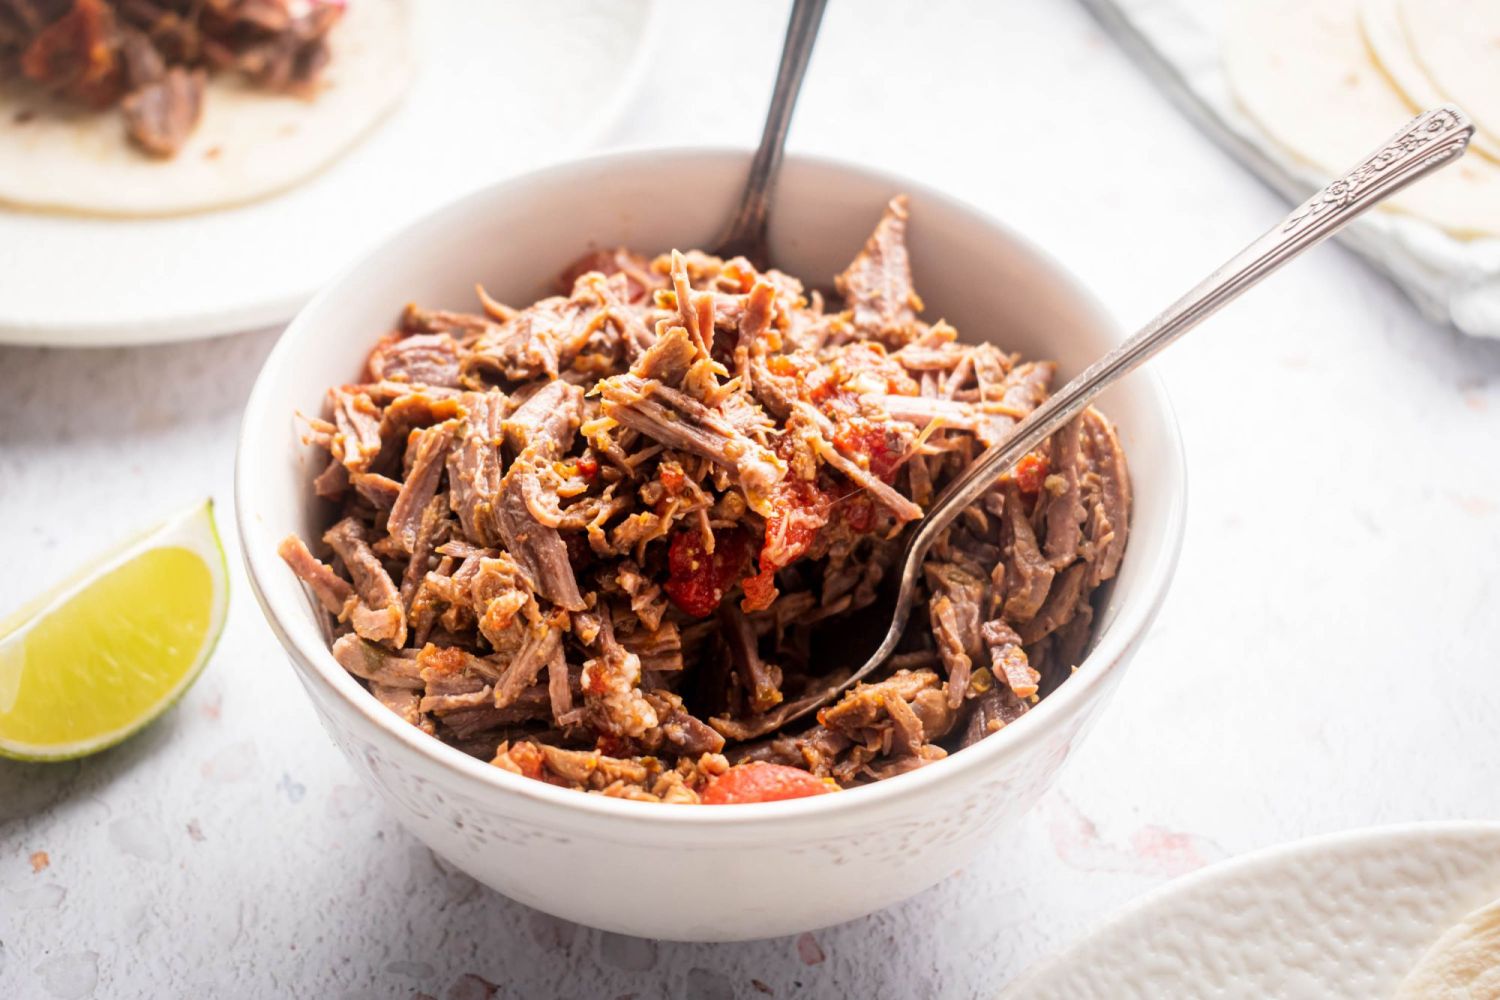 Easy crockpot Mexican shredded beef cooked with tomatoes, spices, and chipotle peppers in a bowl with a lime wedge.